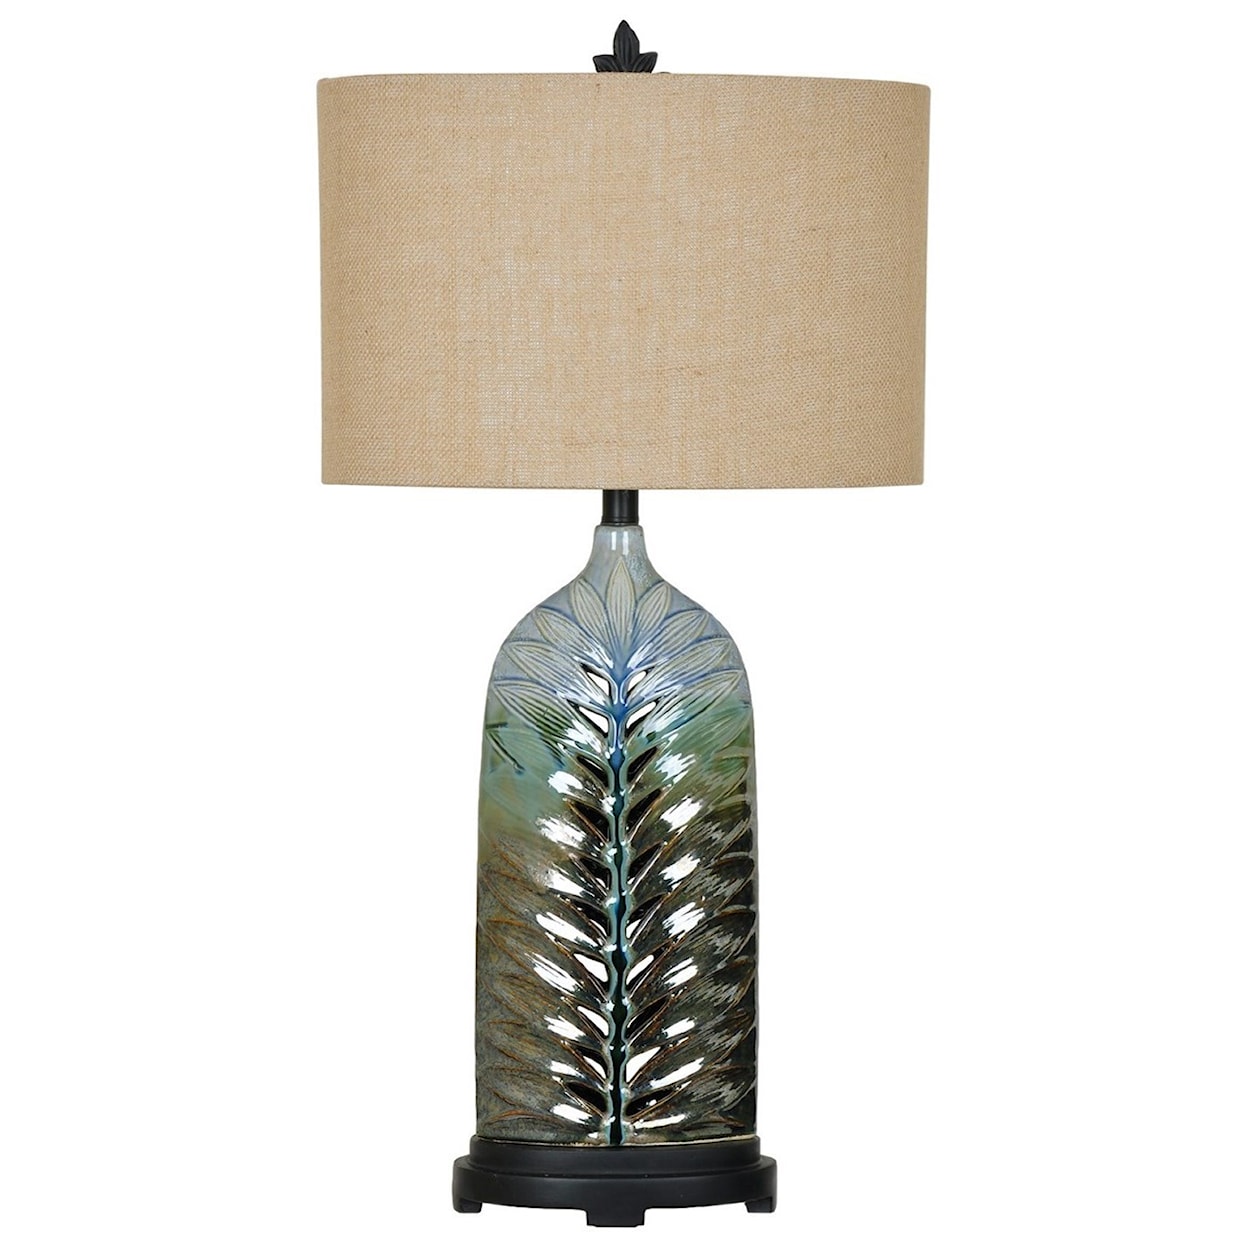 Crestview Collection Lighting Rim Table Lamp